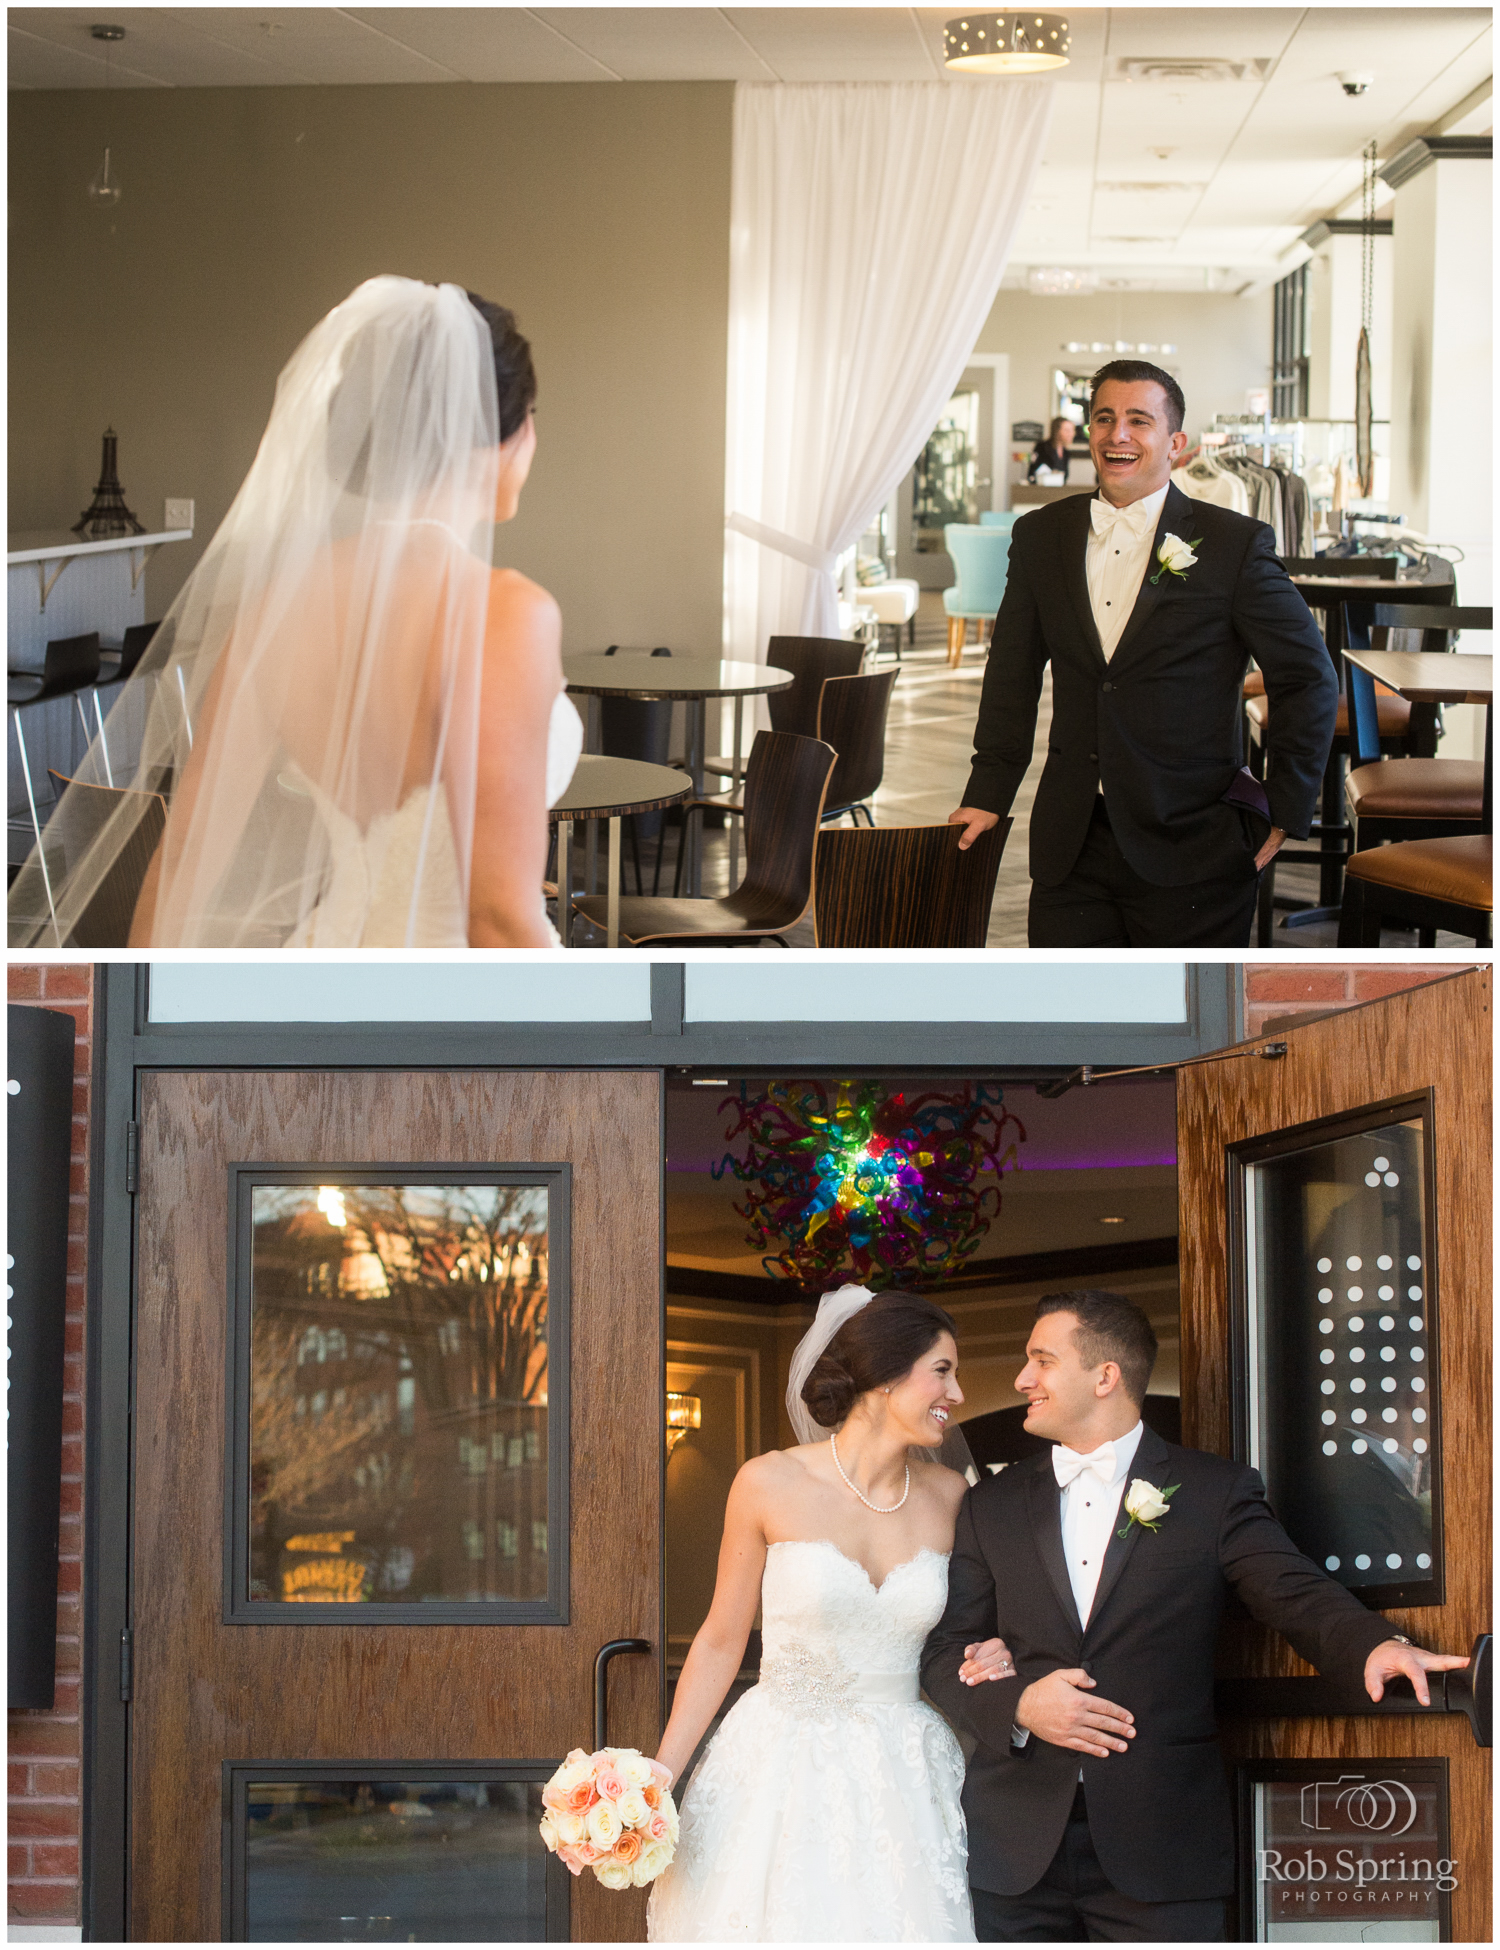 First look at Pavilion Grand Hotel, Saratoga Springs, NY wedding photographer | Canfield Casino wedding